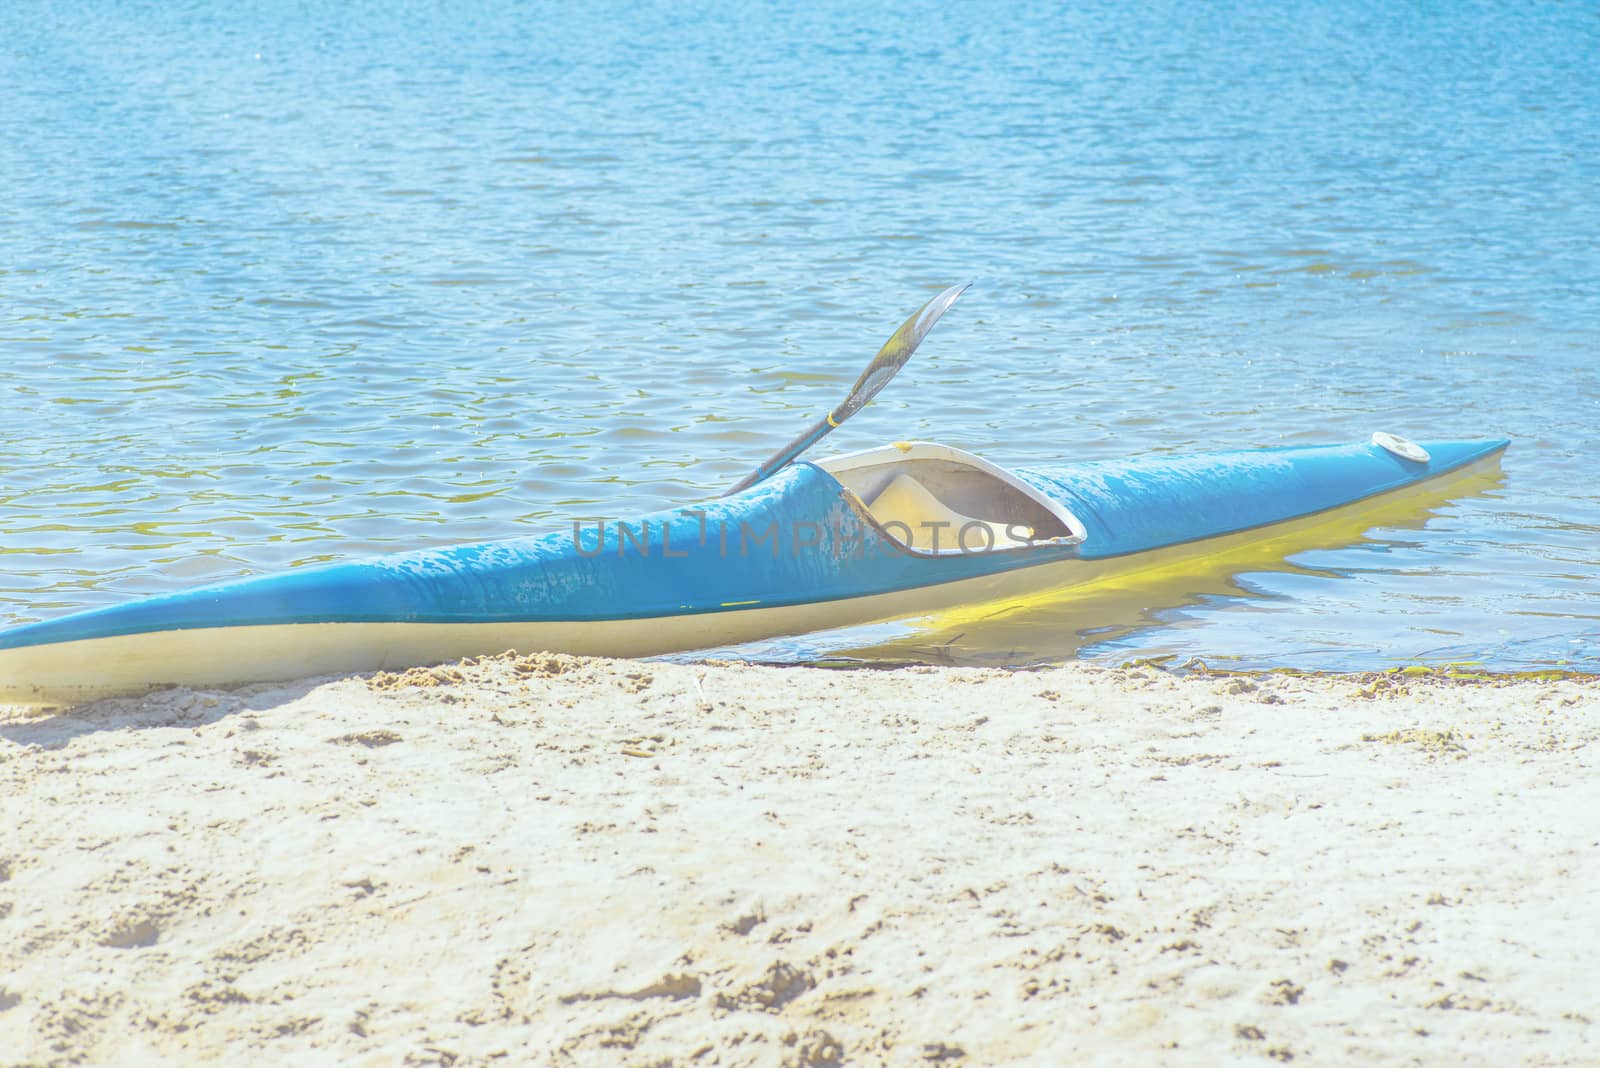 Kayak on the beach. Kayak blue and yellow. Boat on the river bank. Summer sunny day. Kayak sport.Kayaking concept.